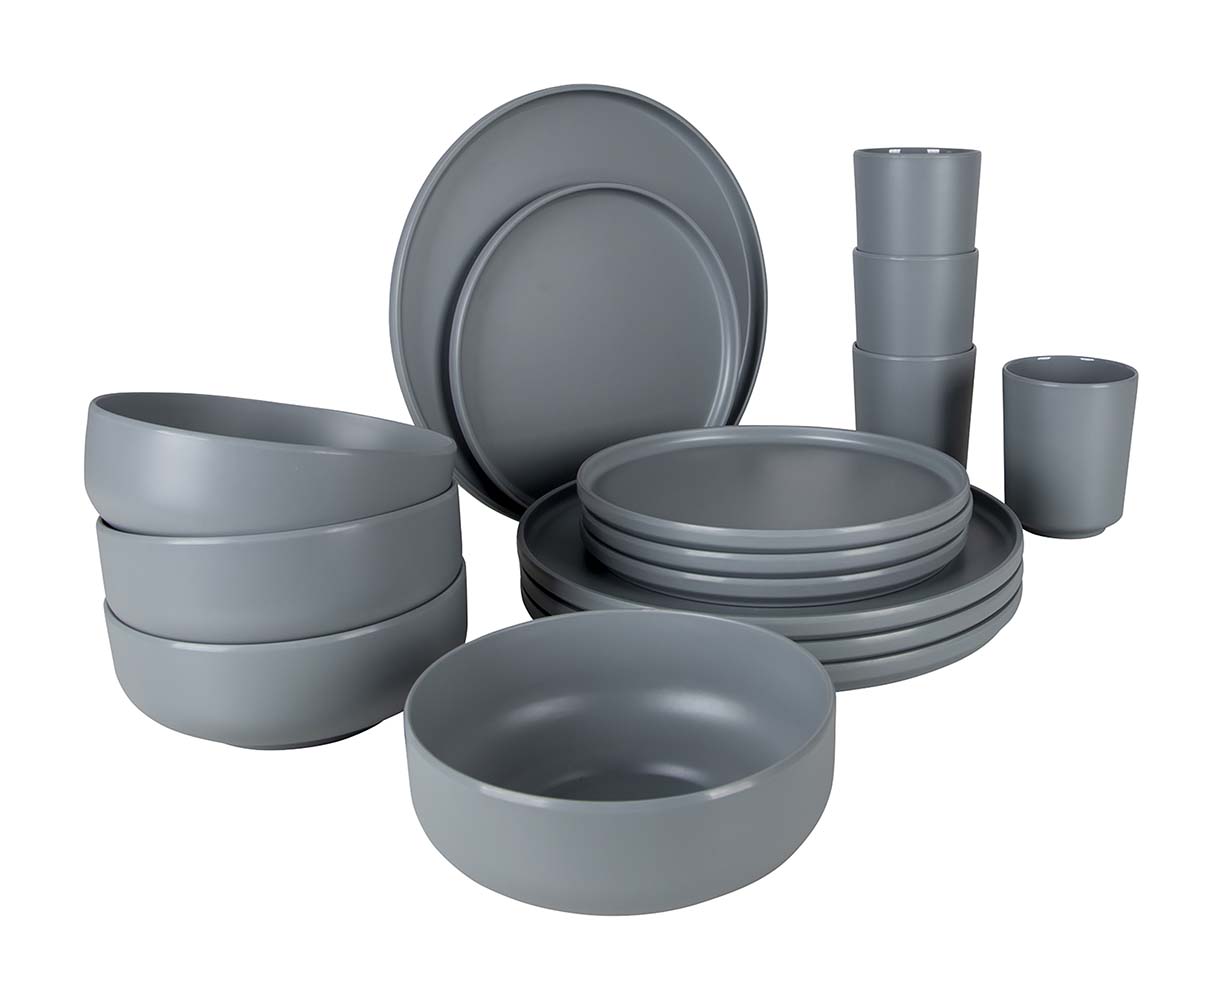 6181454 Bo-Camp - Industrial collection - Tableware - Patom - Melamine - 16 Pieces - Light grey